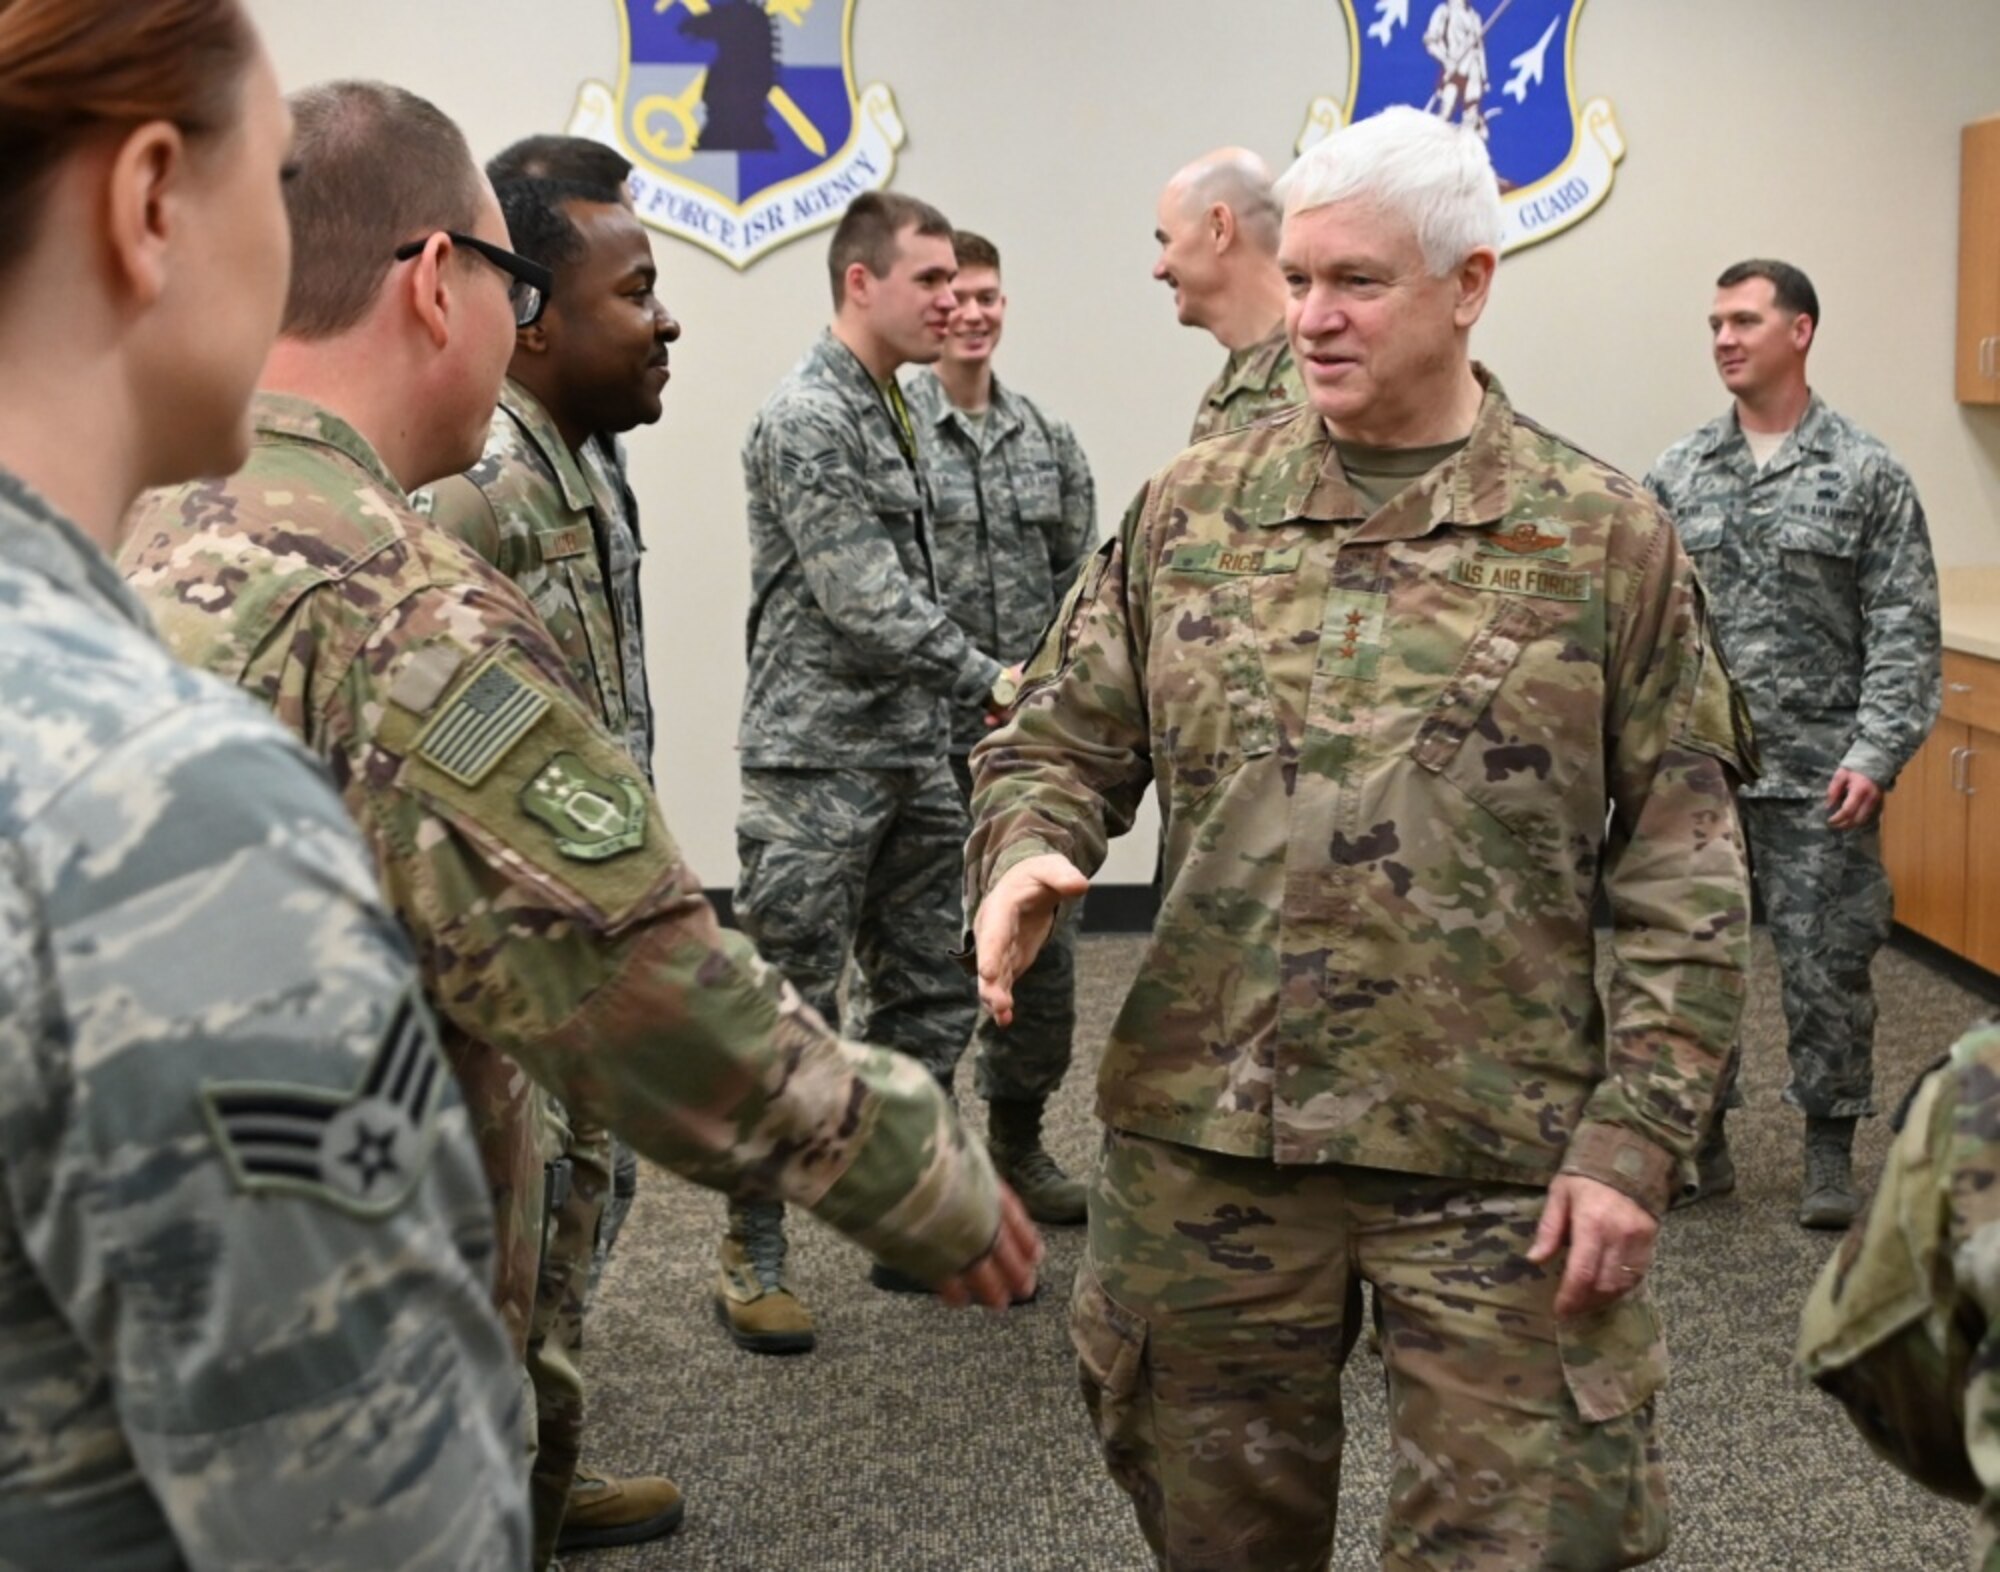 U.S. Air Force Lt. Gen. L. Scott Rice, director of the Air National Guard, greets a group to Airmen at the 118th Wing, Tennessee ANG, Dec. 6, 2019 at Berry Field Air National Guard Base, Nashville, Tenn.. Rice’s trip to the 118th WG was his final stop in his visit to all 90 wings in the ANG during his tenure as director. (U.S. Air National Guard photo by Staff Sgt. Anthony Agosti)